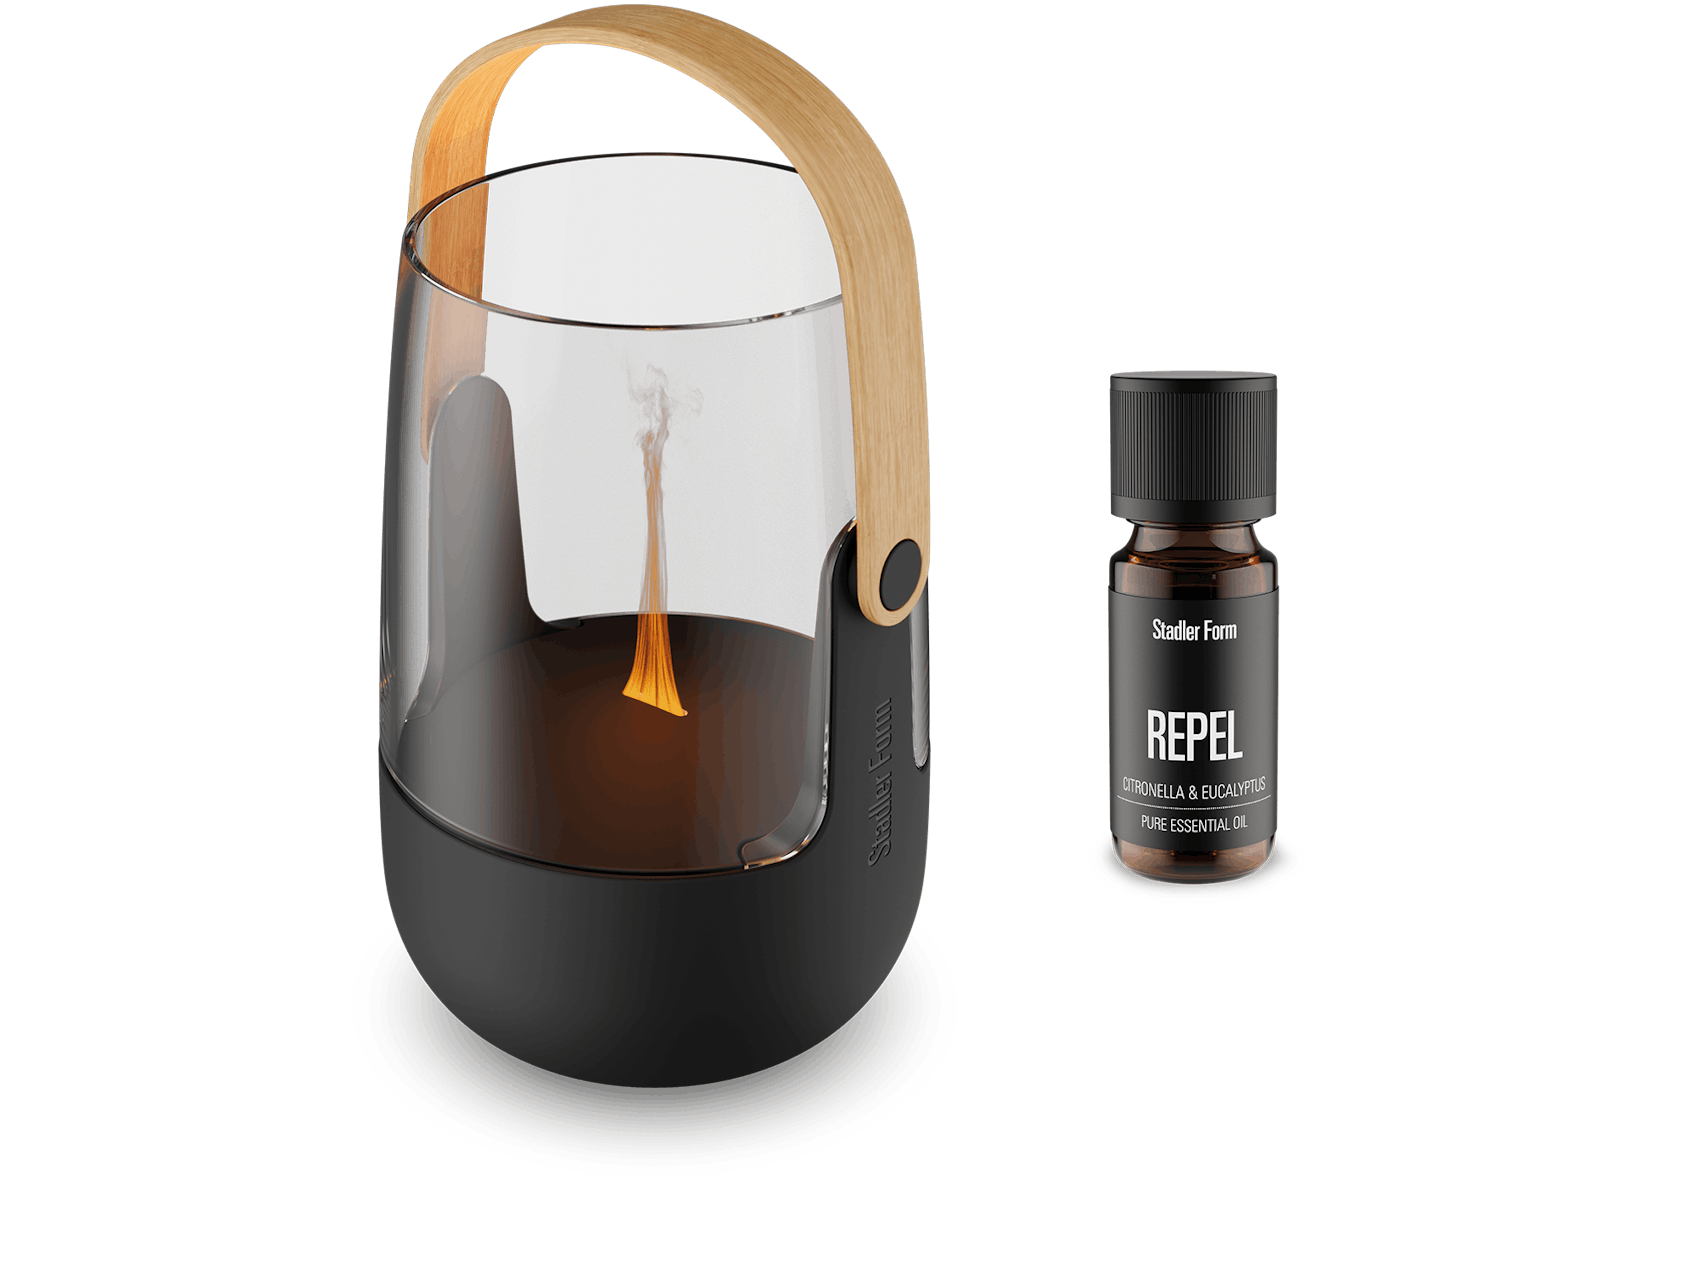 Sophie little aroma diffuser bundle by Stadler Form with Repel essential oil